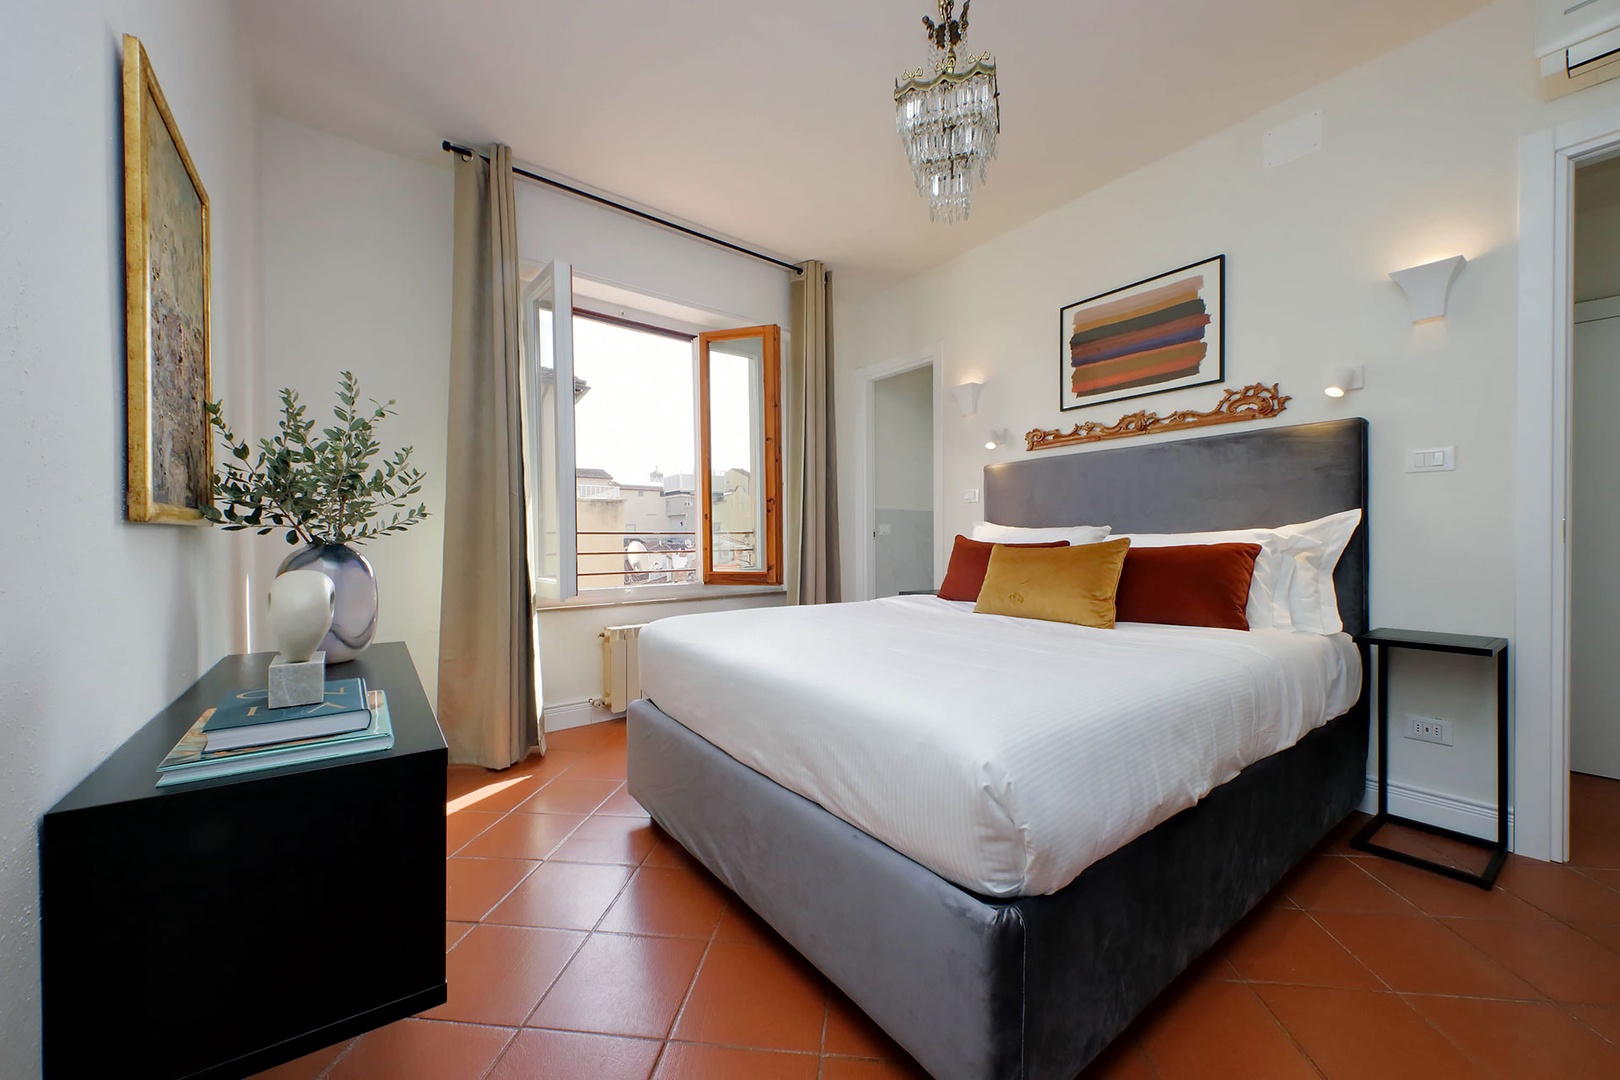 Two finely appointed bedrooms offer views of the city.